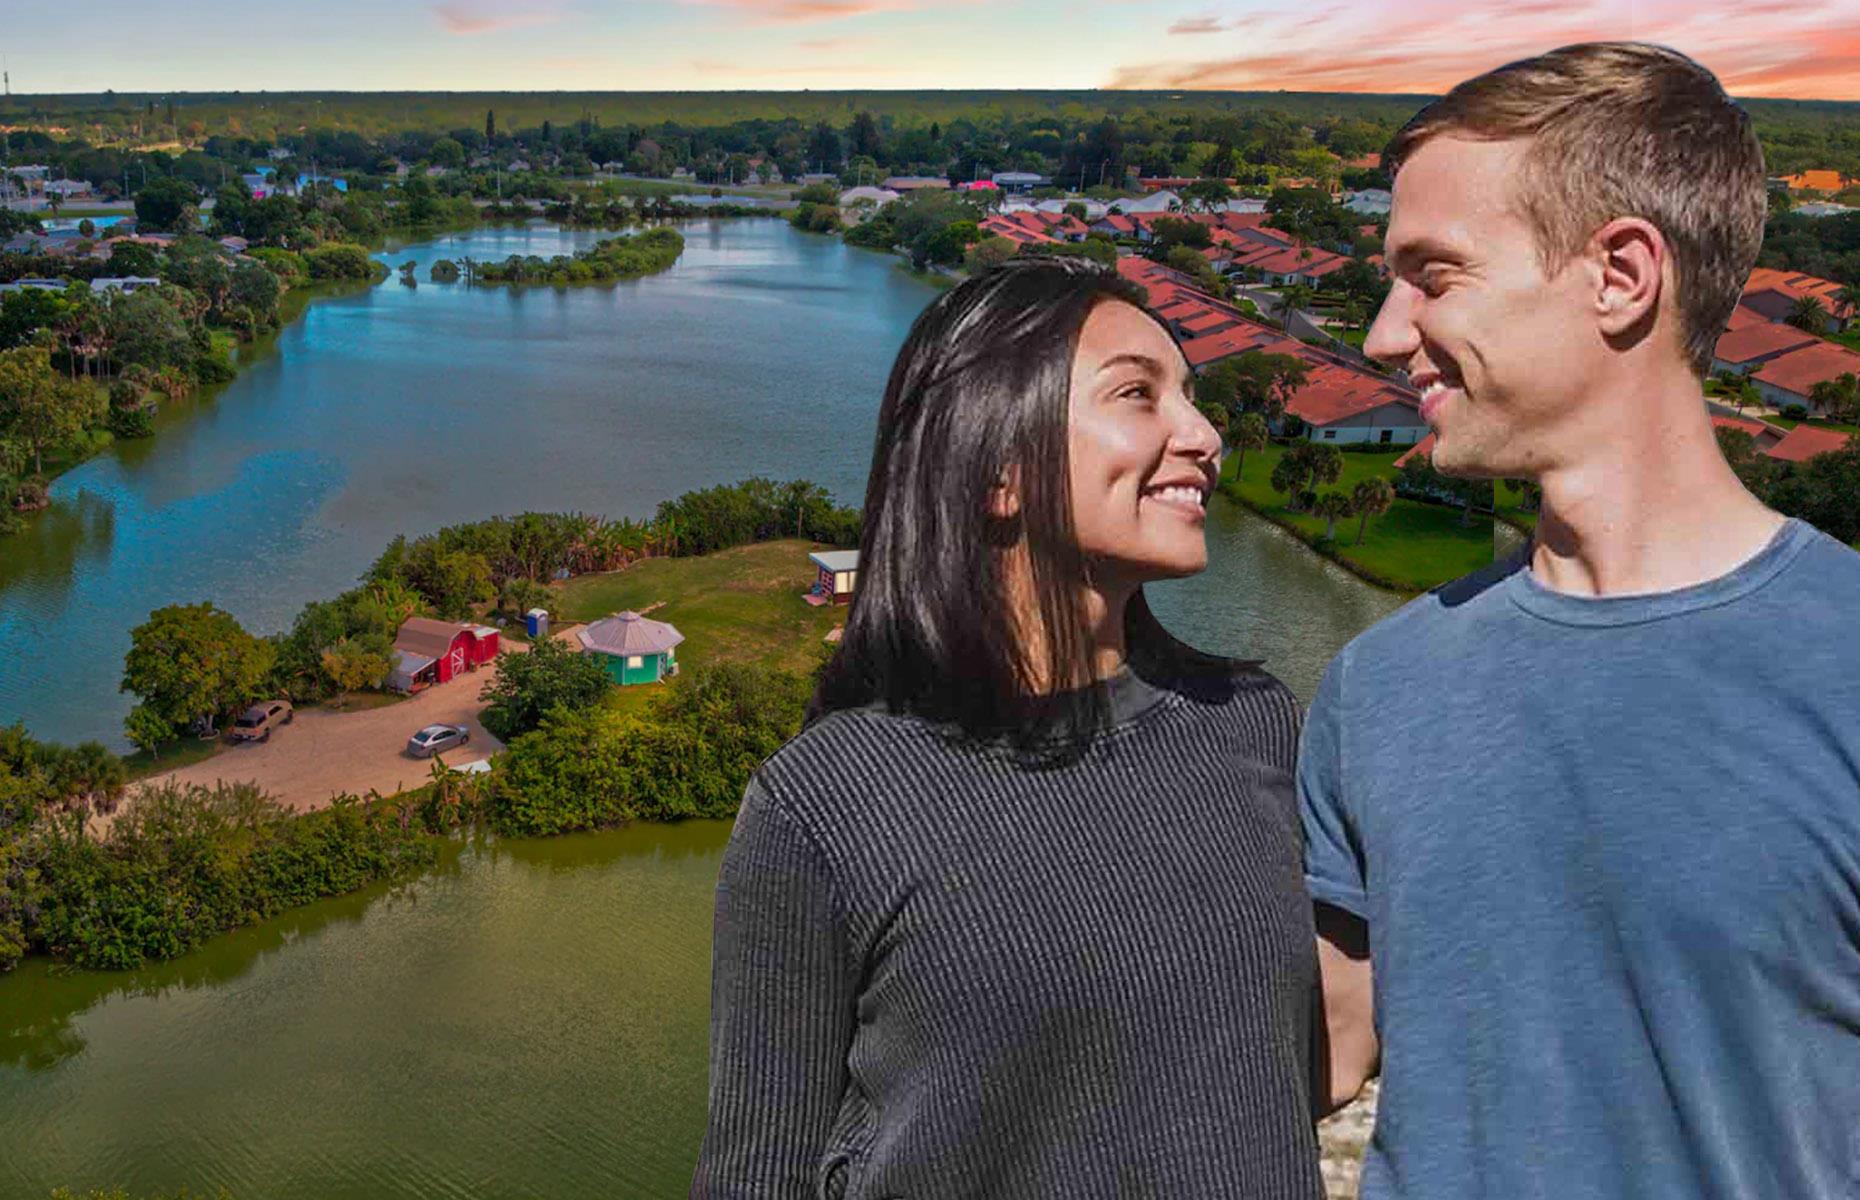 <p>Imagine waking up every day in a cute cabin on your very own private island in the middle of a beautiful lake. Now imagine that it costs less than your average family home.</p>  <p>This is the story of how an enterprising young couple opted out of the traditional route to homeownership to take on a rundown piece of land in Florida and transform it into their very own tiny living oasis.</p>  <p> Click or scroll on to discover their remarkable journey and take a tour of the island, which they've now opened up to the public...</p>